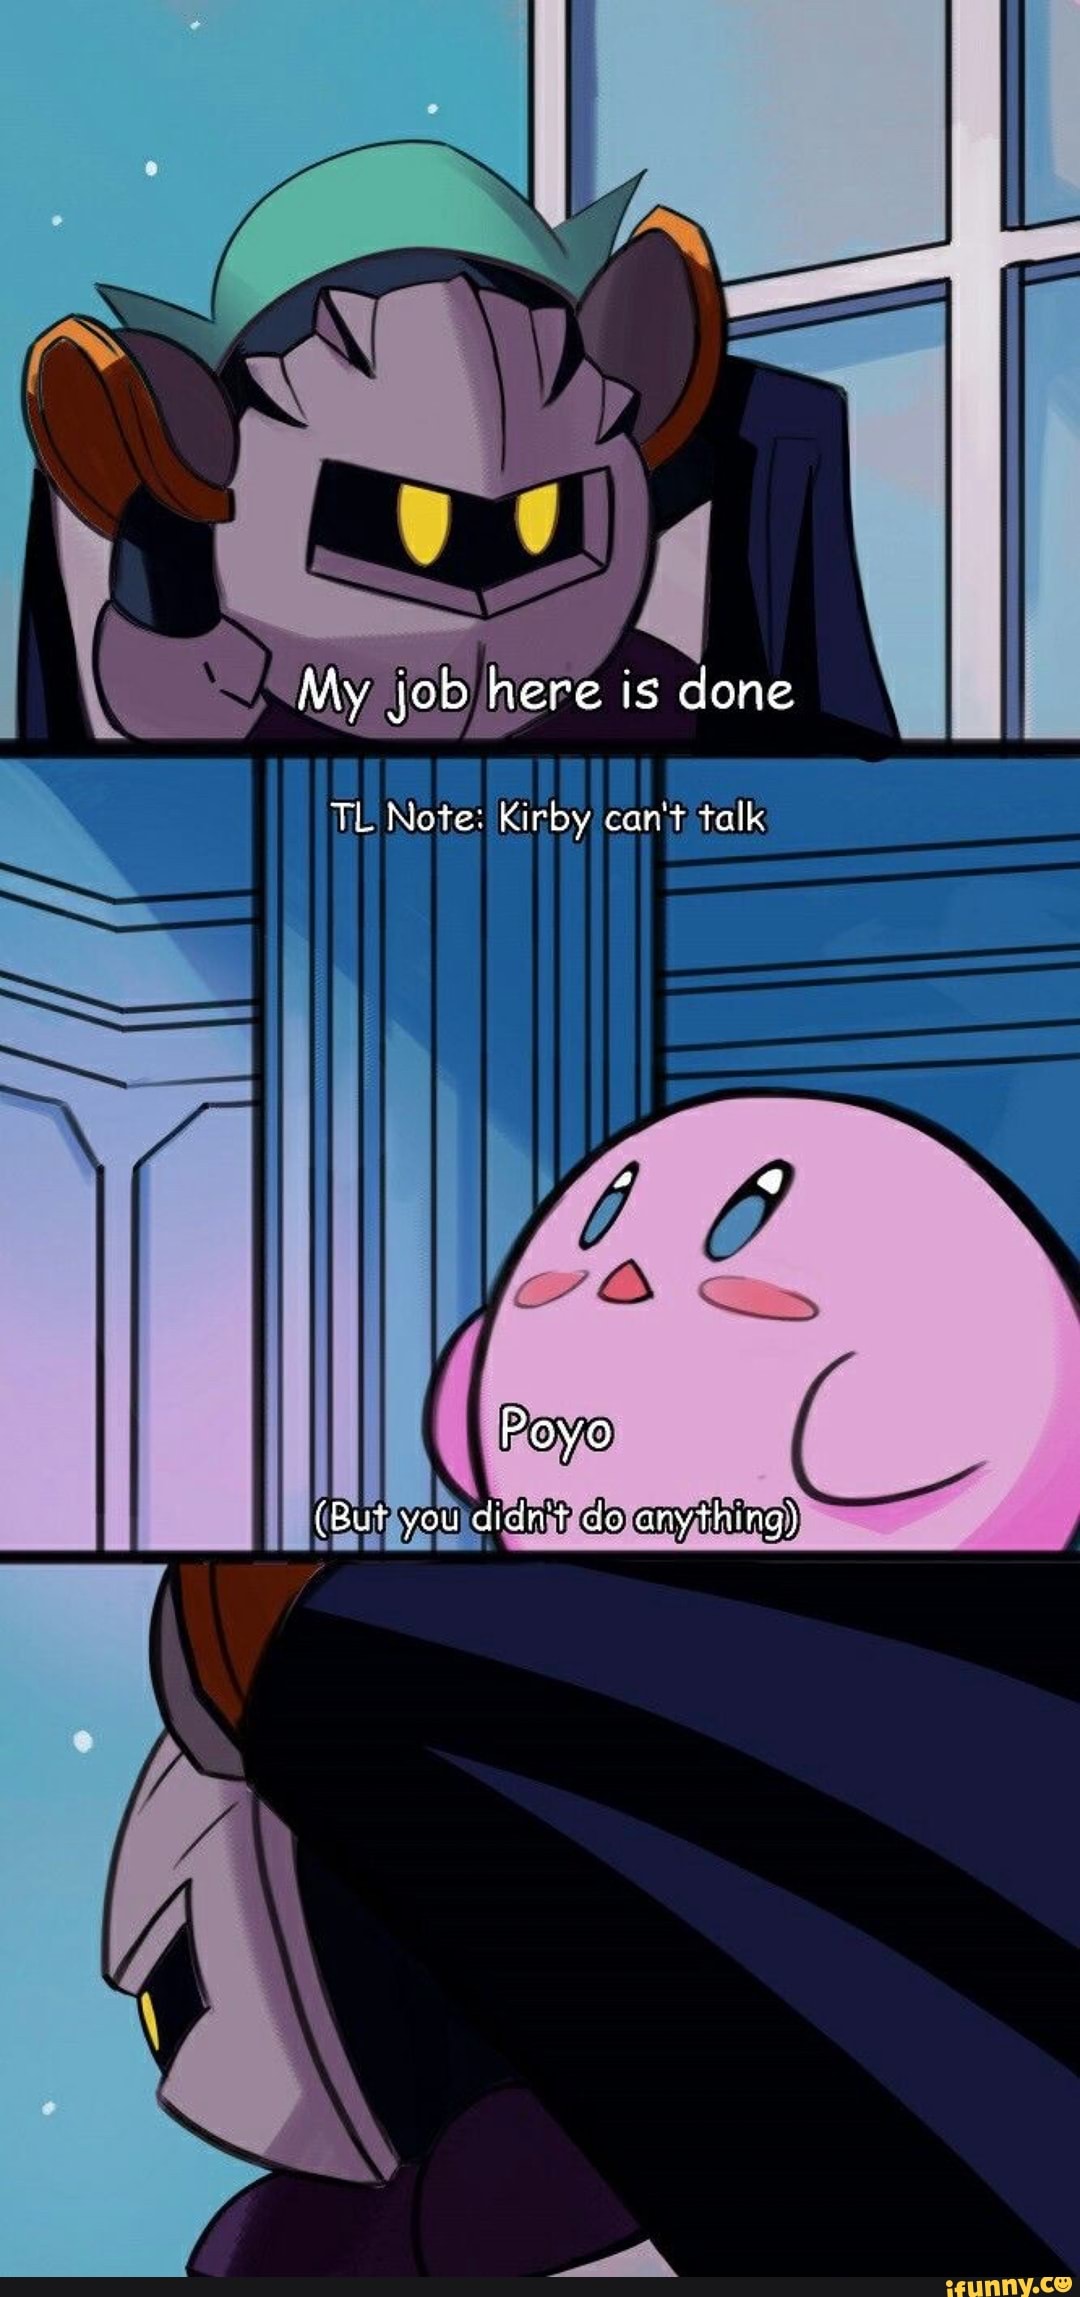 My job here is done TL Note: Kirby can't talk Poyo (But you dicn't co  anythng) - iFunny